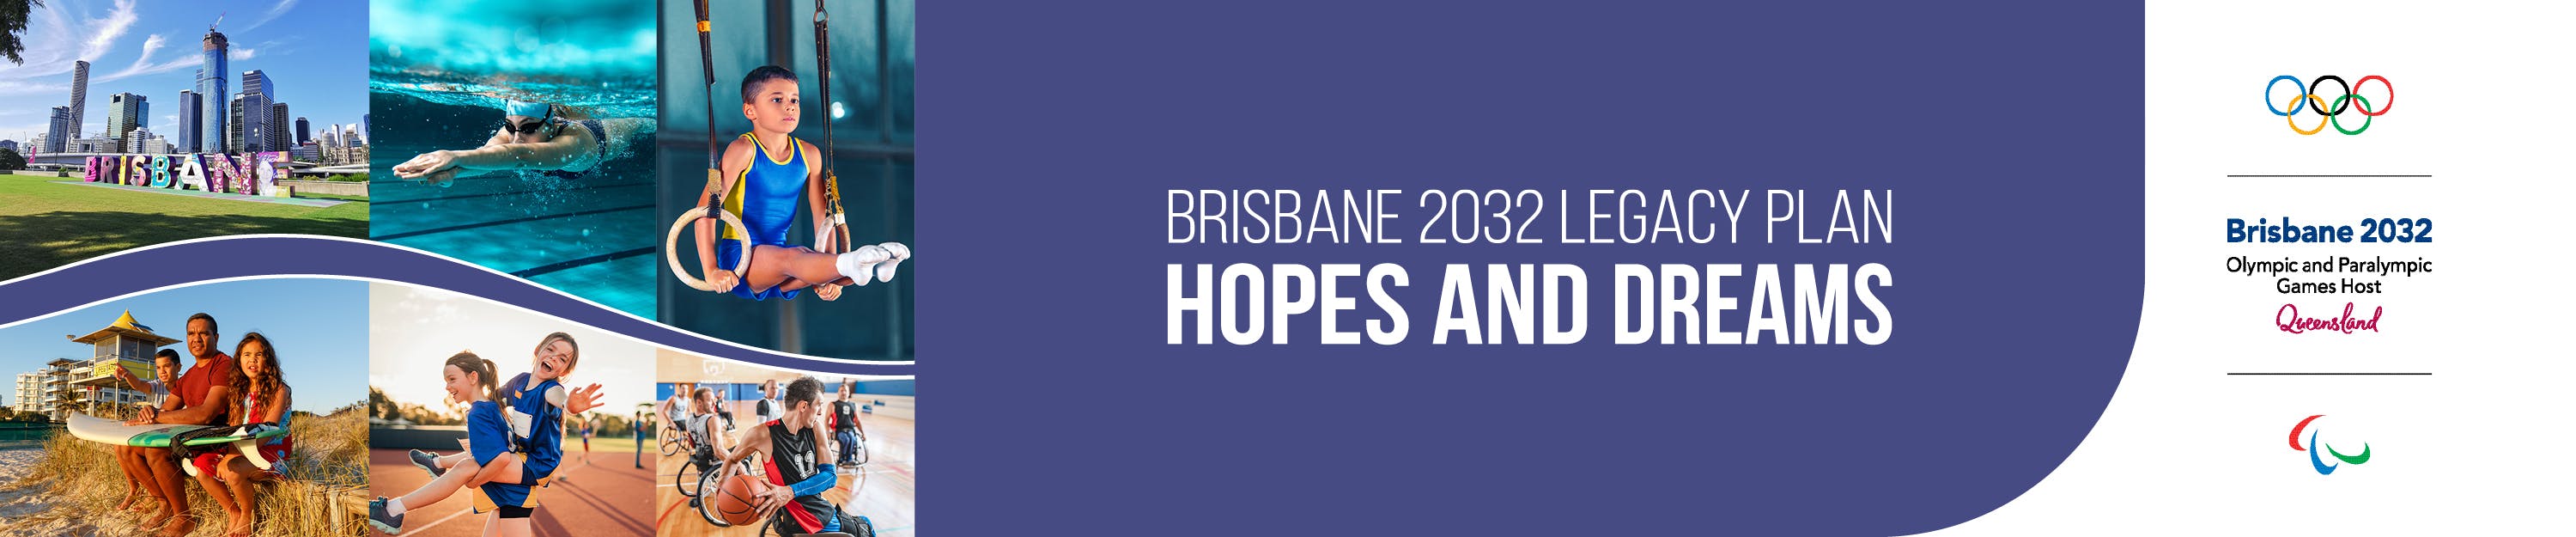  Brisbane 2032 legacy hopes & dreams banner. Images of swimmer, gymnast, indigenous family at beach & wheelchair basketball